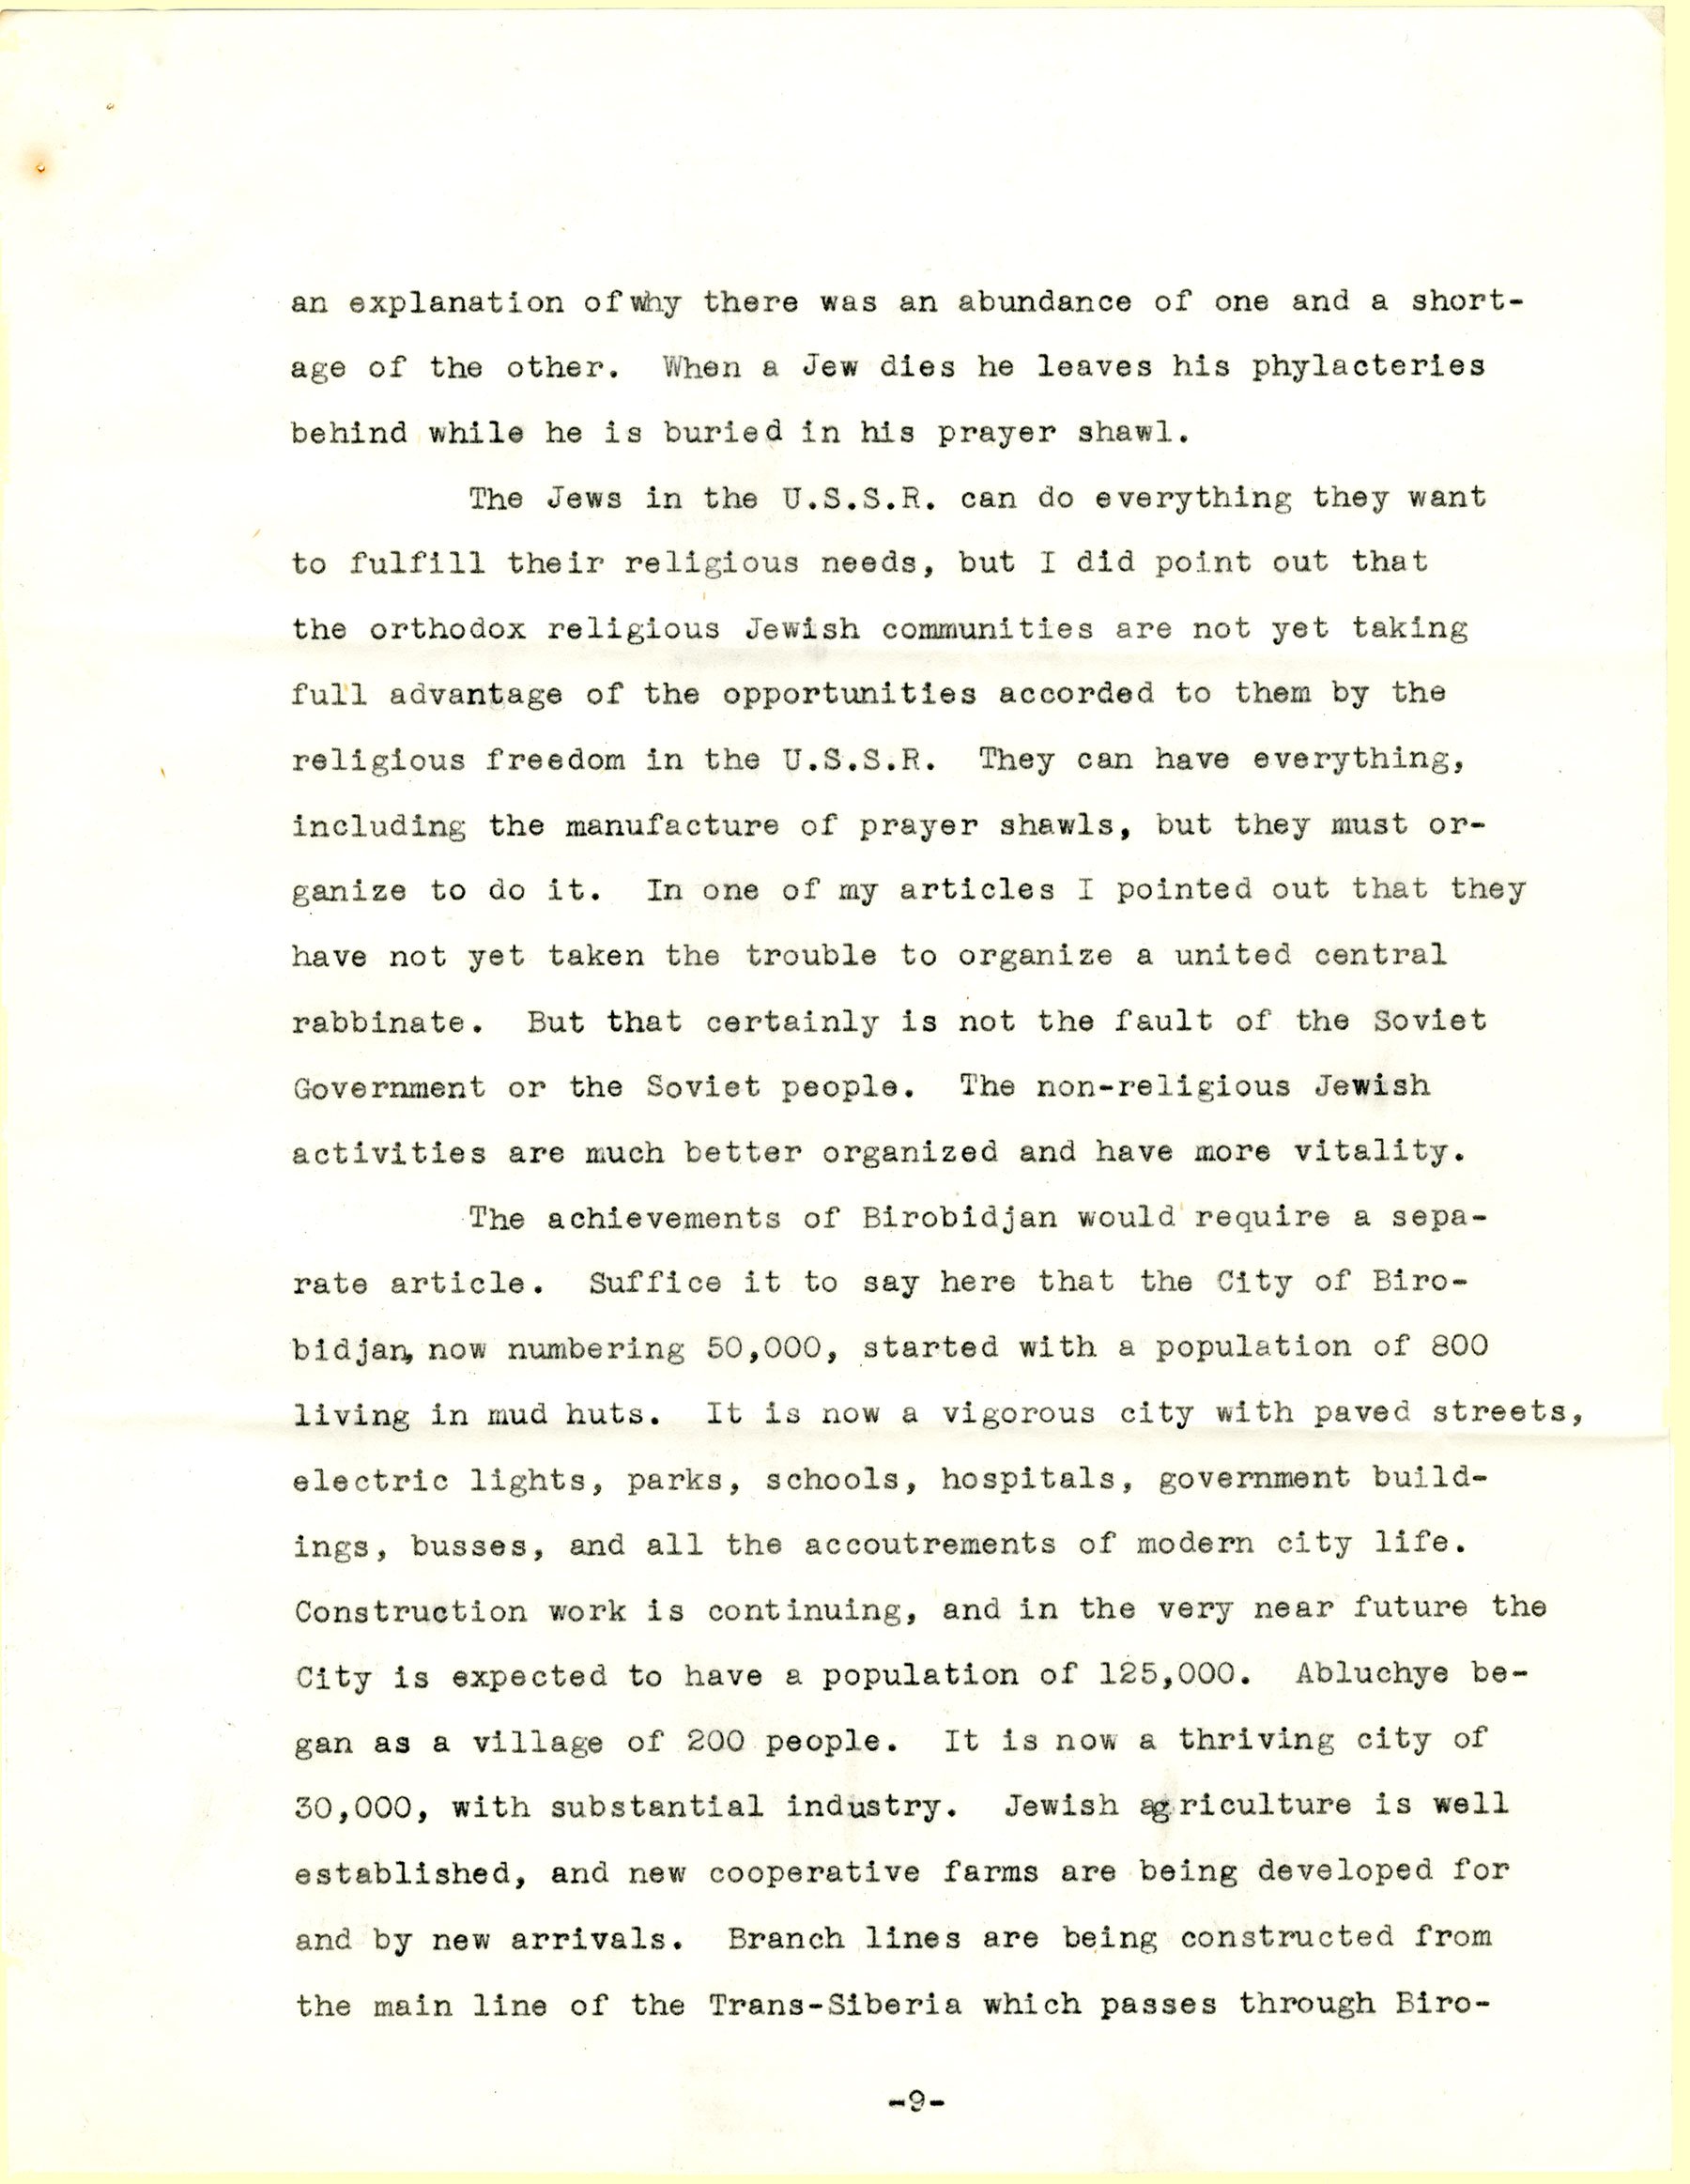 B.Z. Goldberg's letter to The New Palestine, page 9